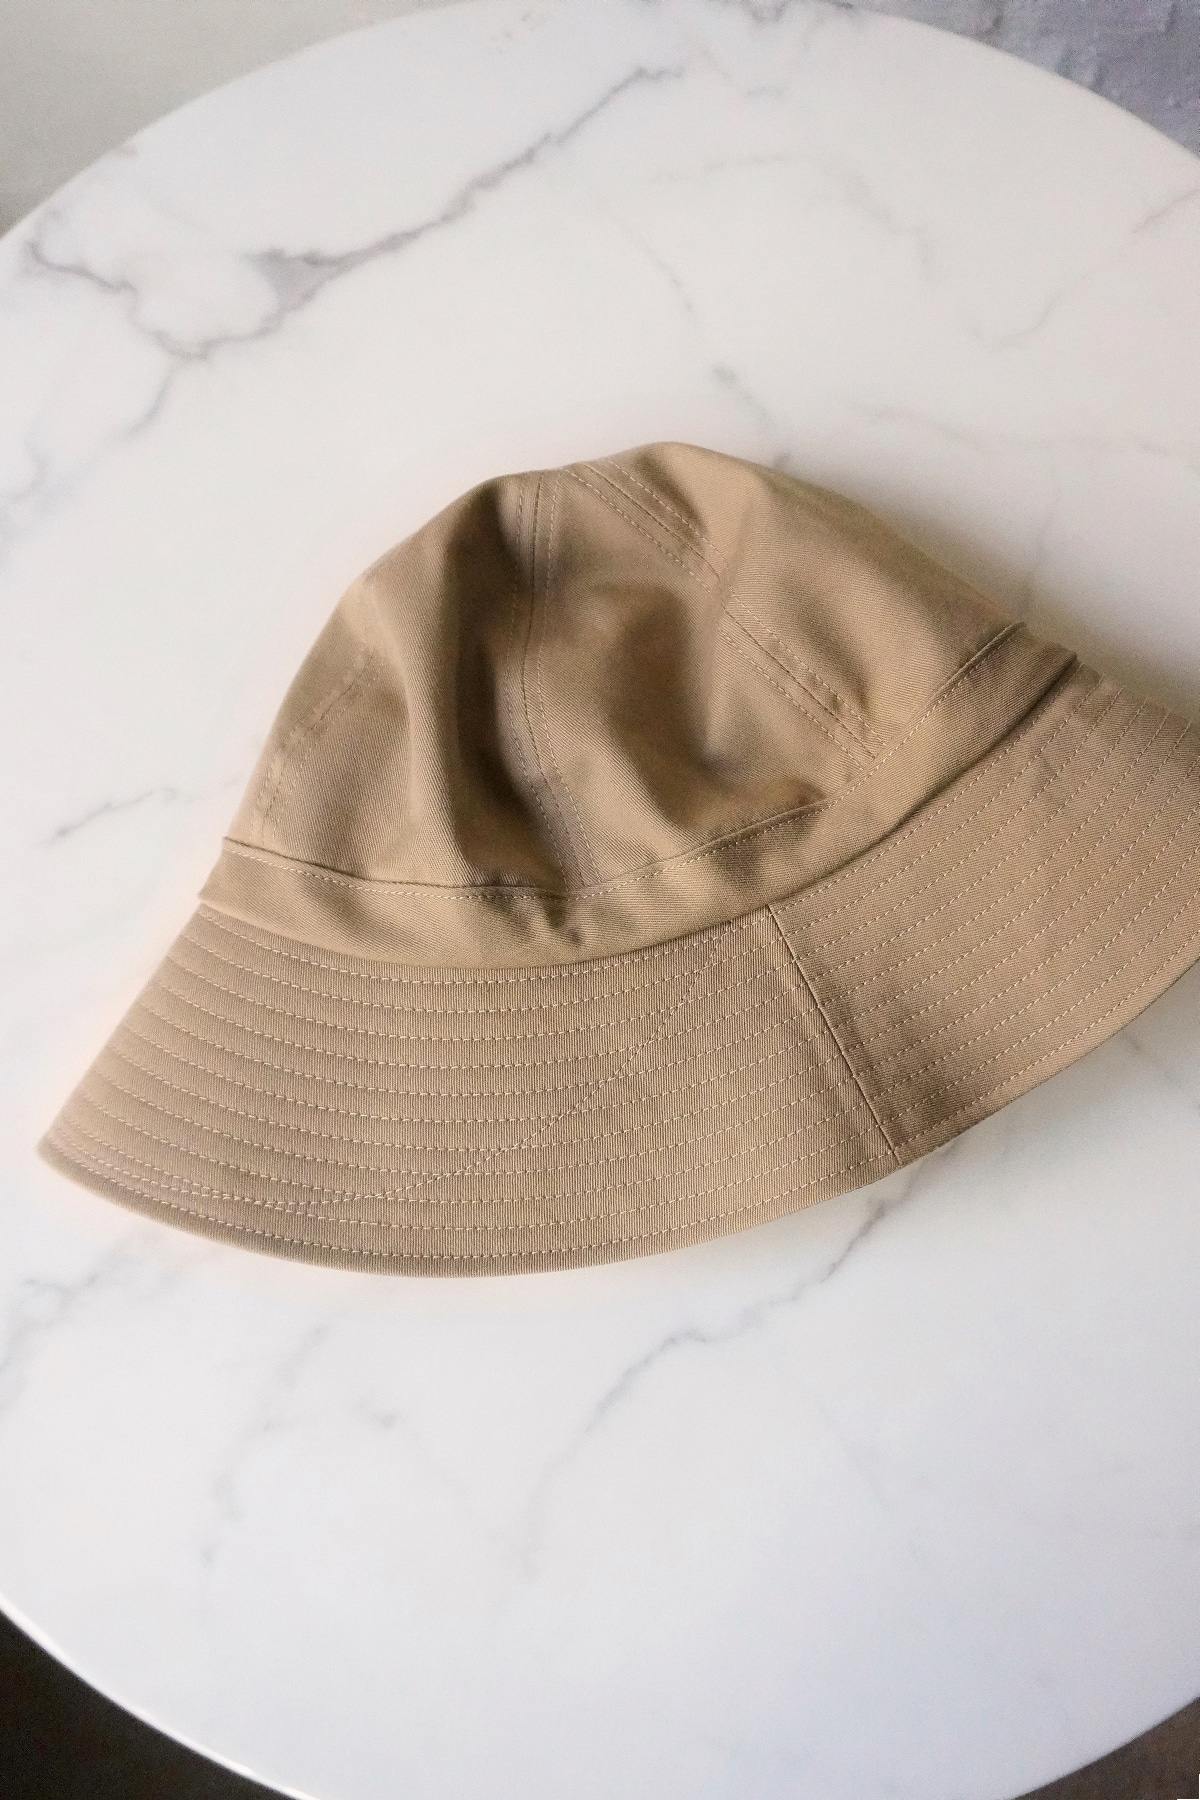 [KENNETH FIELD]  Guide Hat Limited (Chino) - Khaki